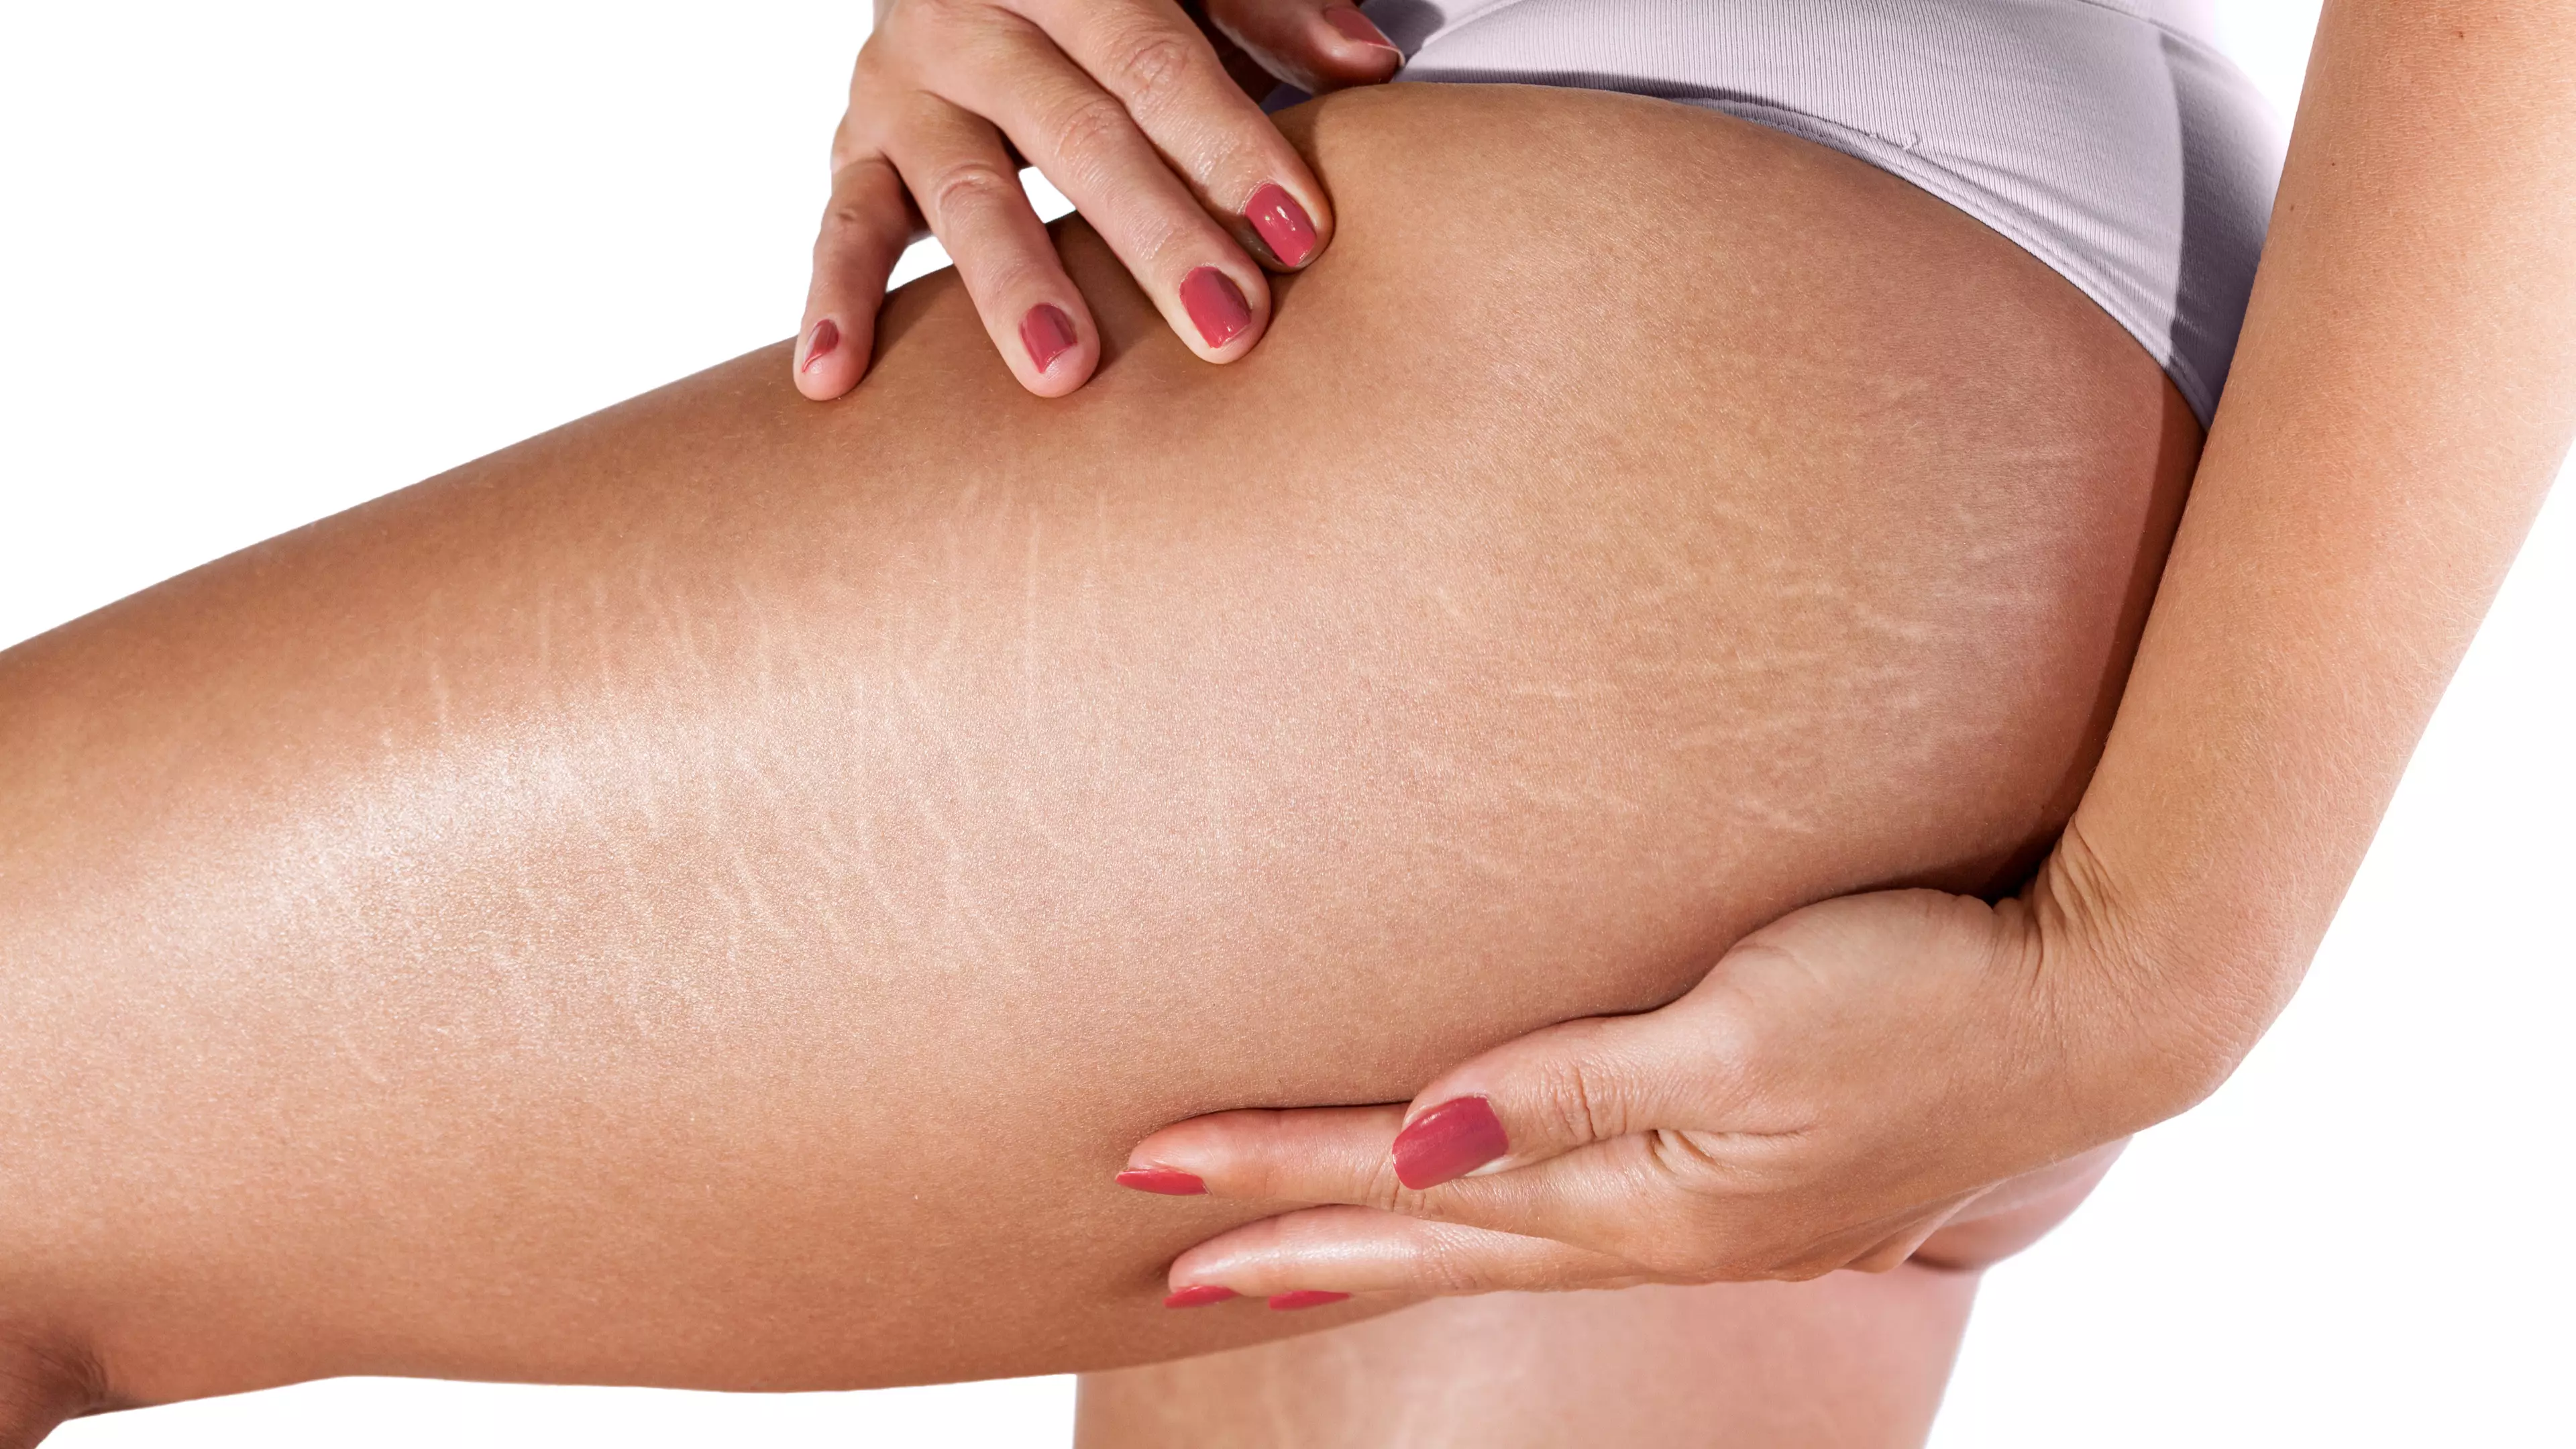 Man Claims Women With Stretch Marks Should Be 'Ashamed' Of Their Bodies